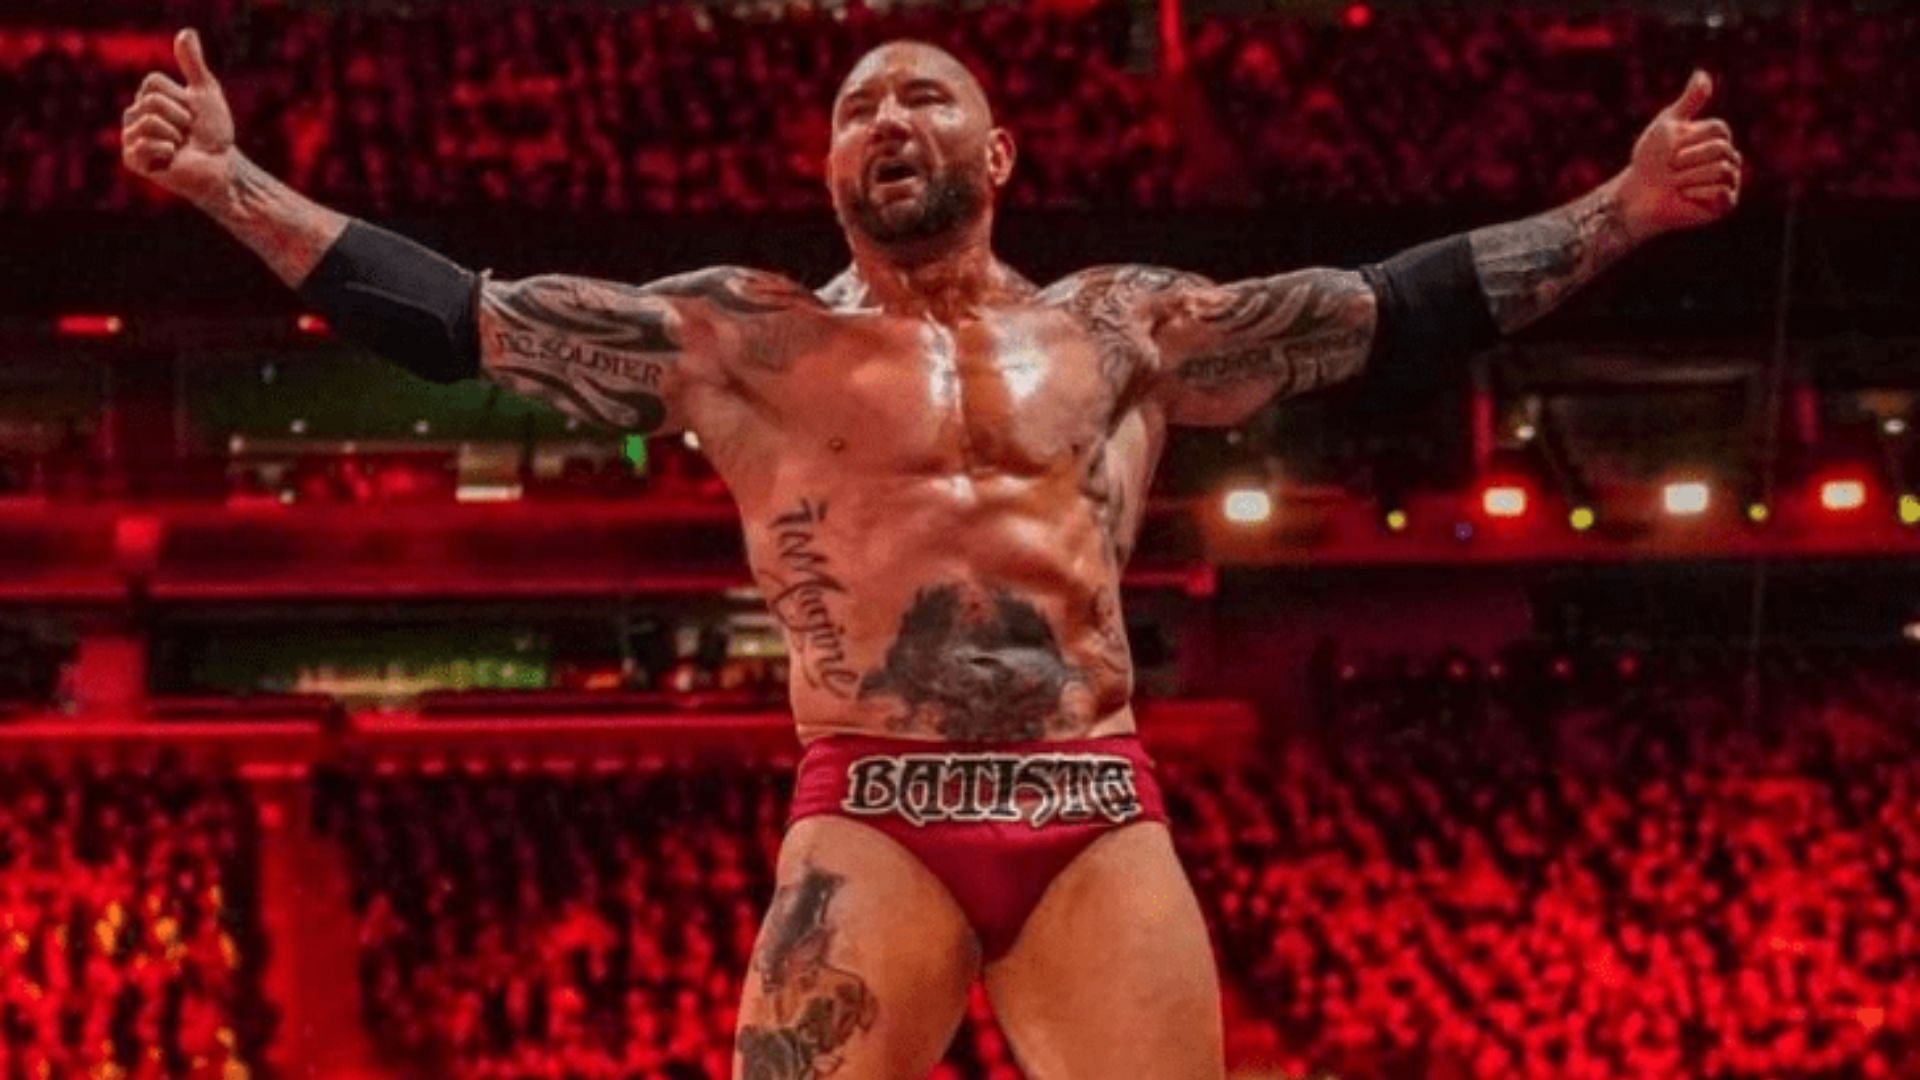 Batista was recently backstage on SmackDown